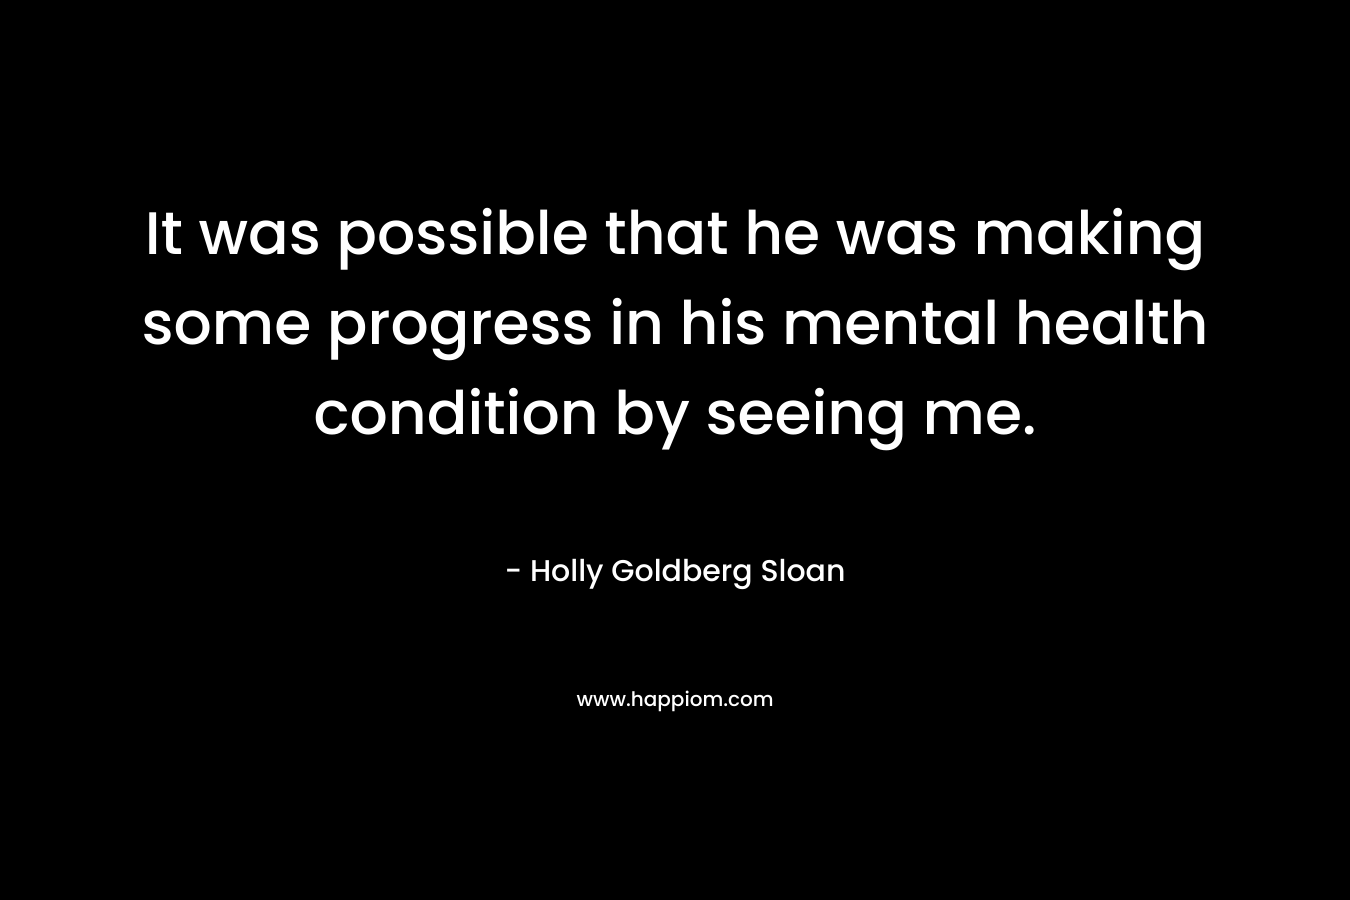 It was possible that he was making some progress in his mental health condition by seeing me. – Holly Goldberg Sloan